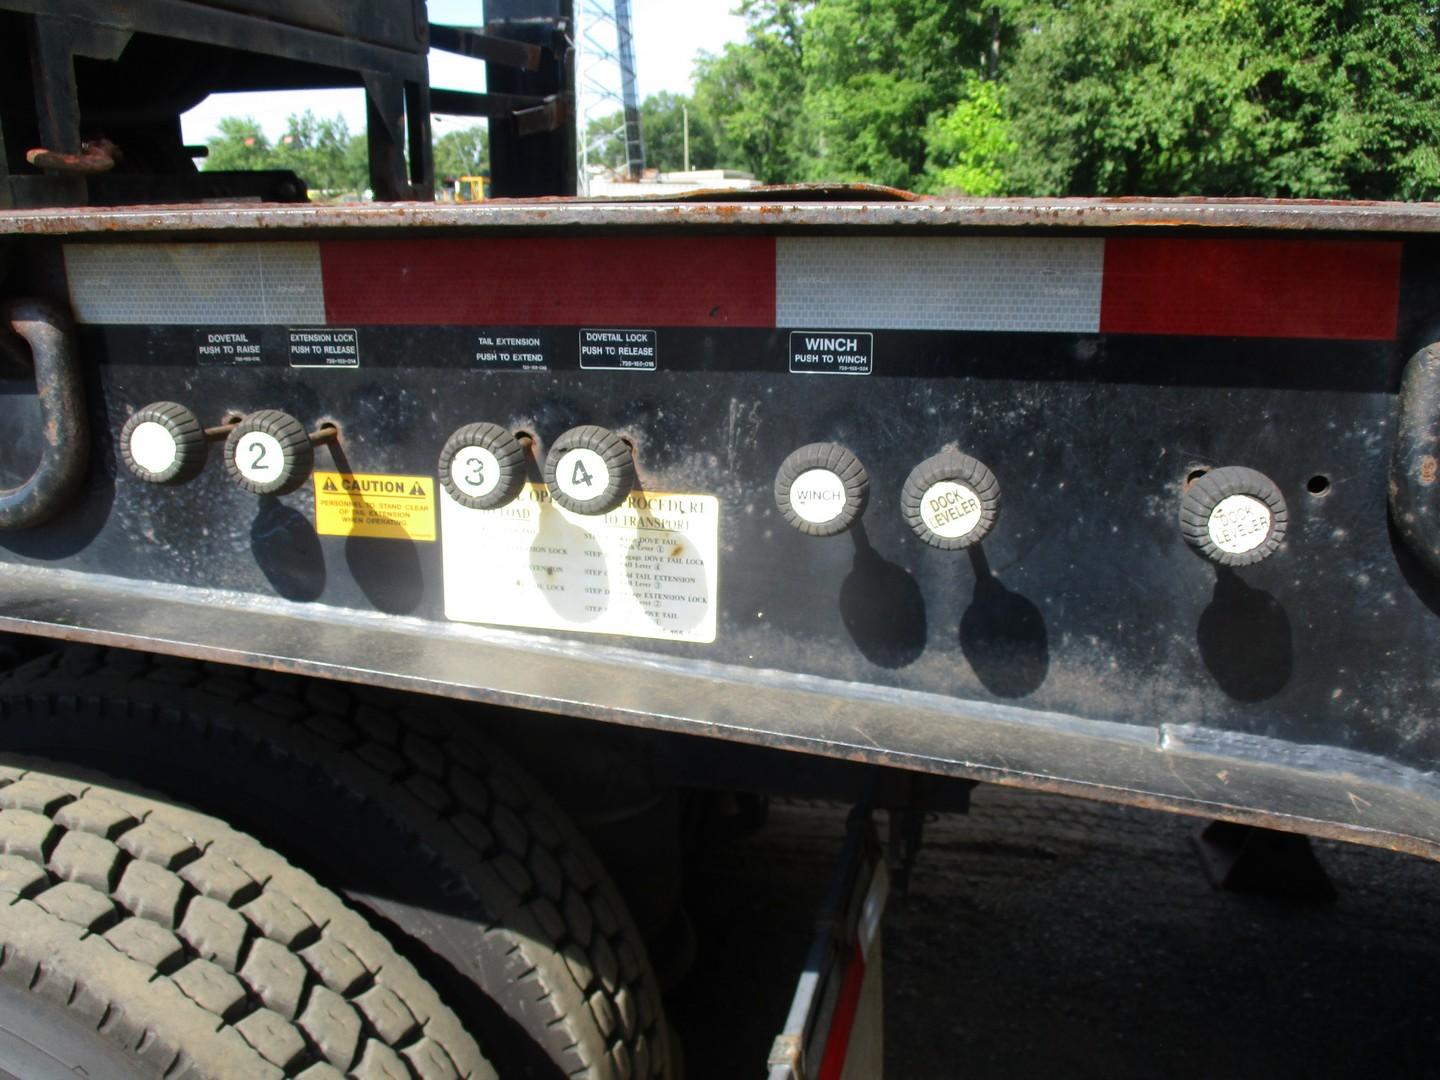 1989 Trail King T/A Recovery Trailer